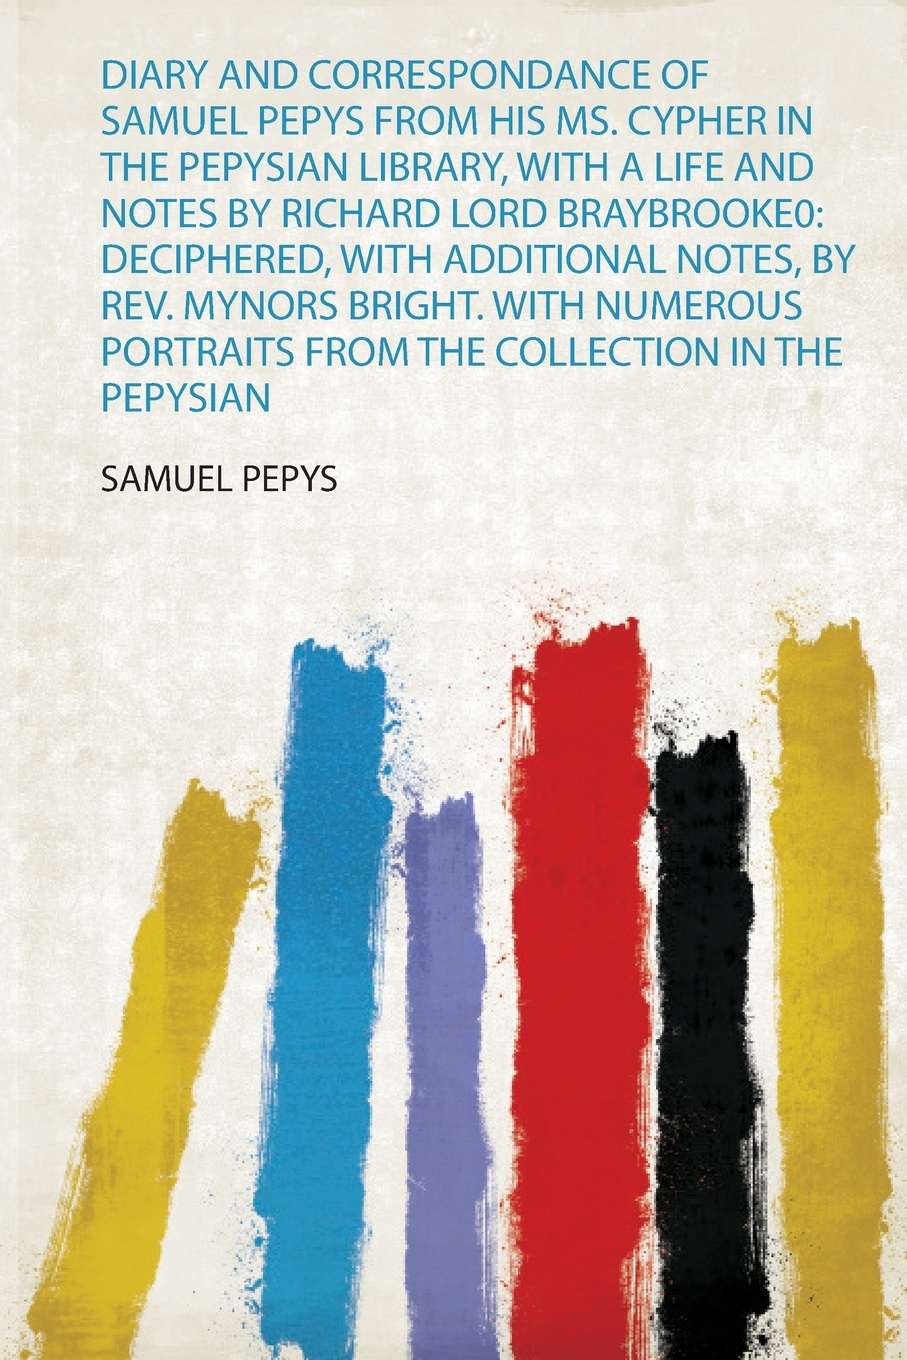 Diary and Correspondance of Samuel Pepys from His Ms. Cypher in the Pepysian Library, With a Life and Notes by Richard Lord Braybrooke0. Deciphered, With Additional Notes, by Rev. Mynors Bright. With Numerous Portraits from the Collection in the P...